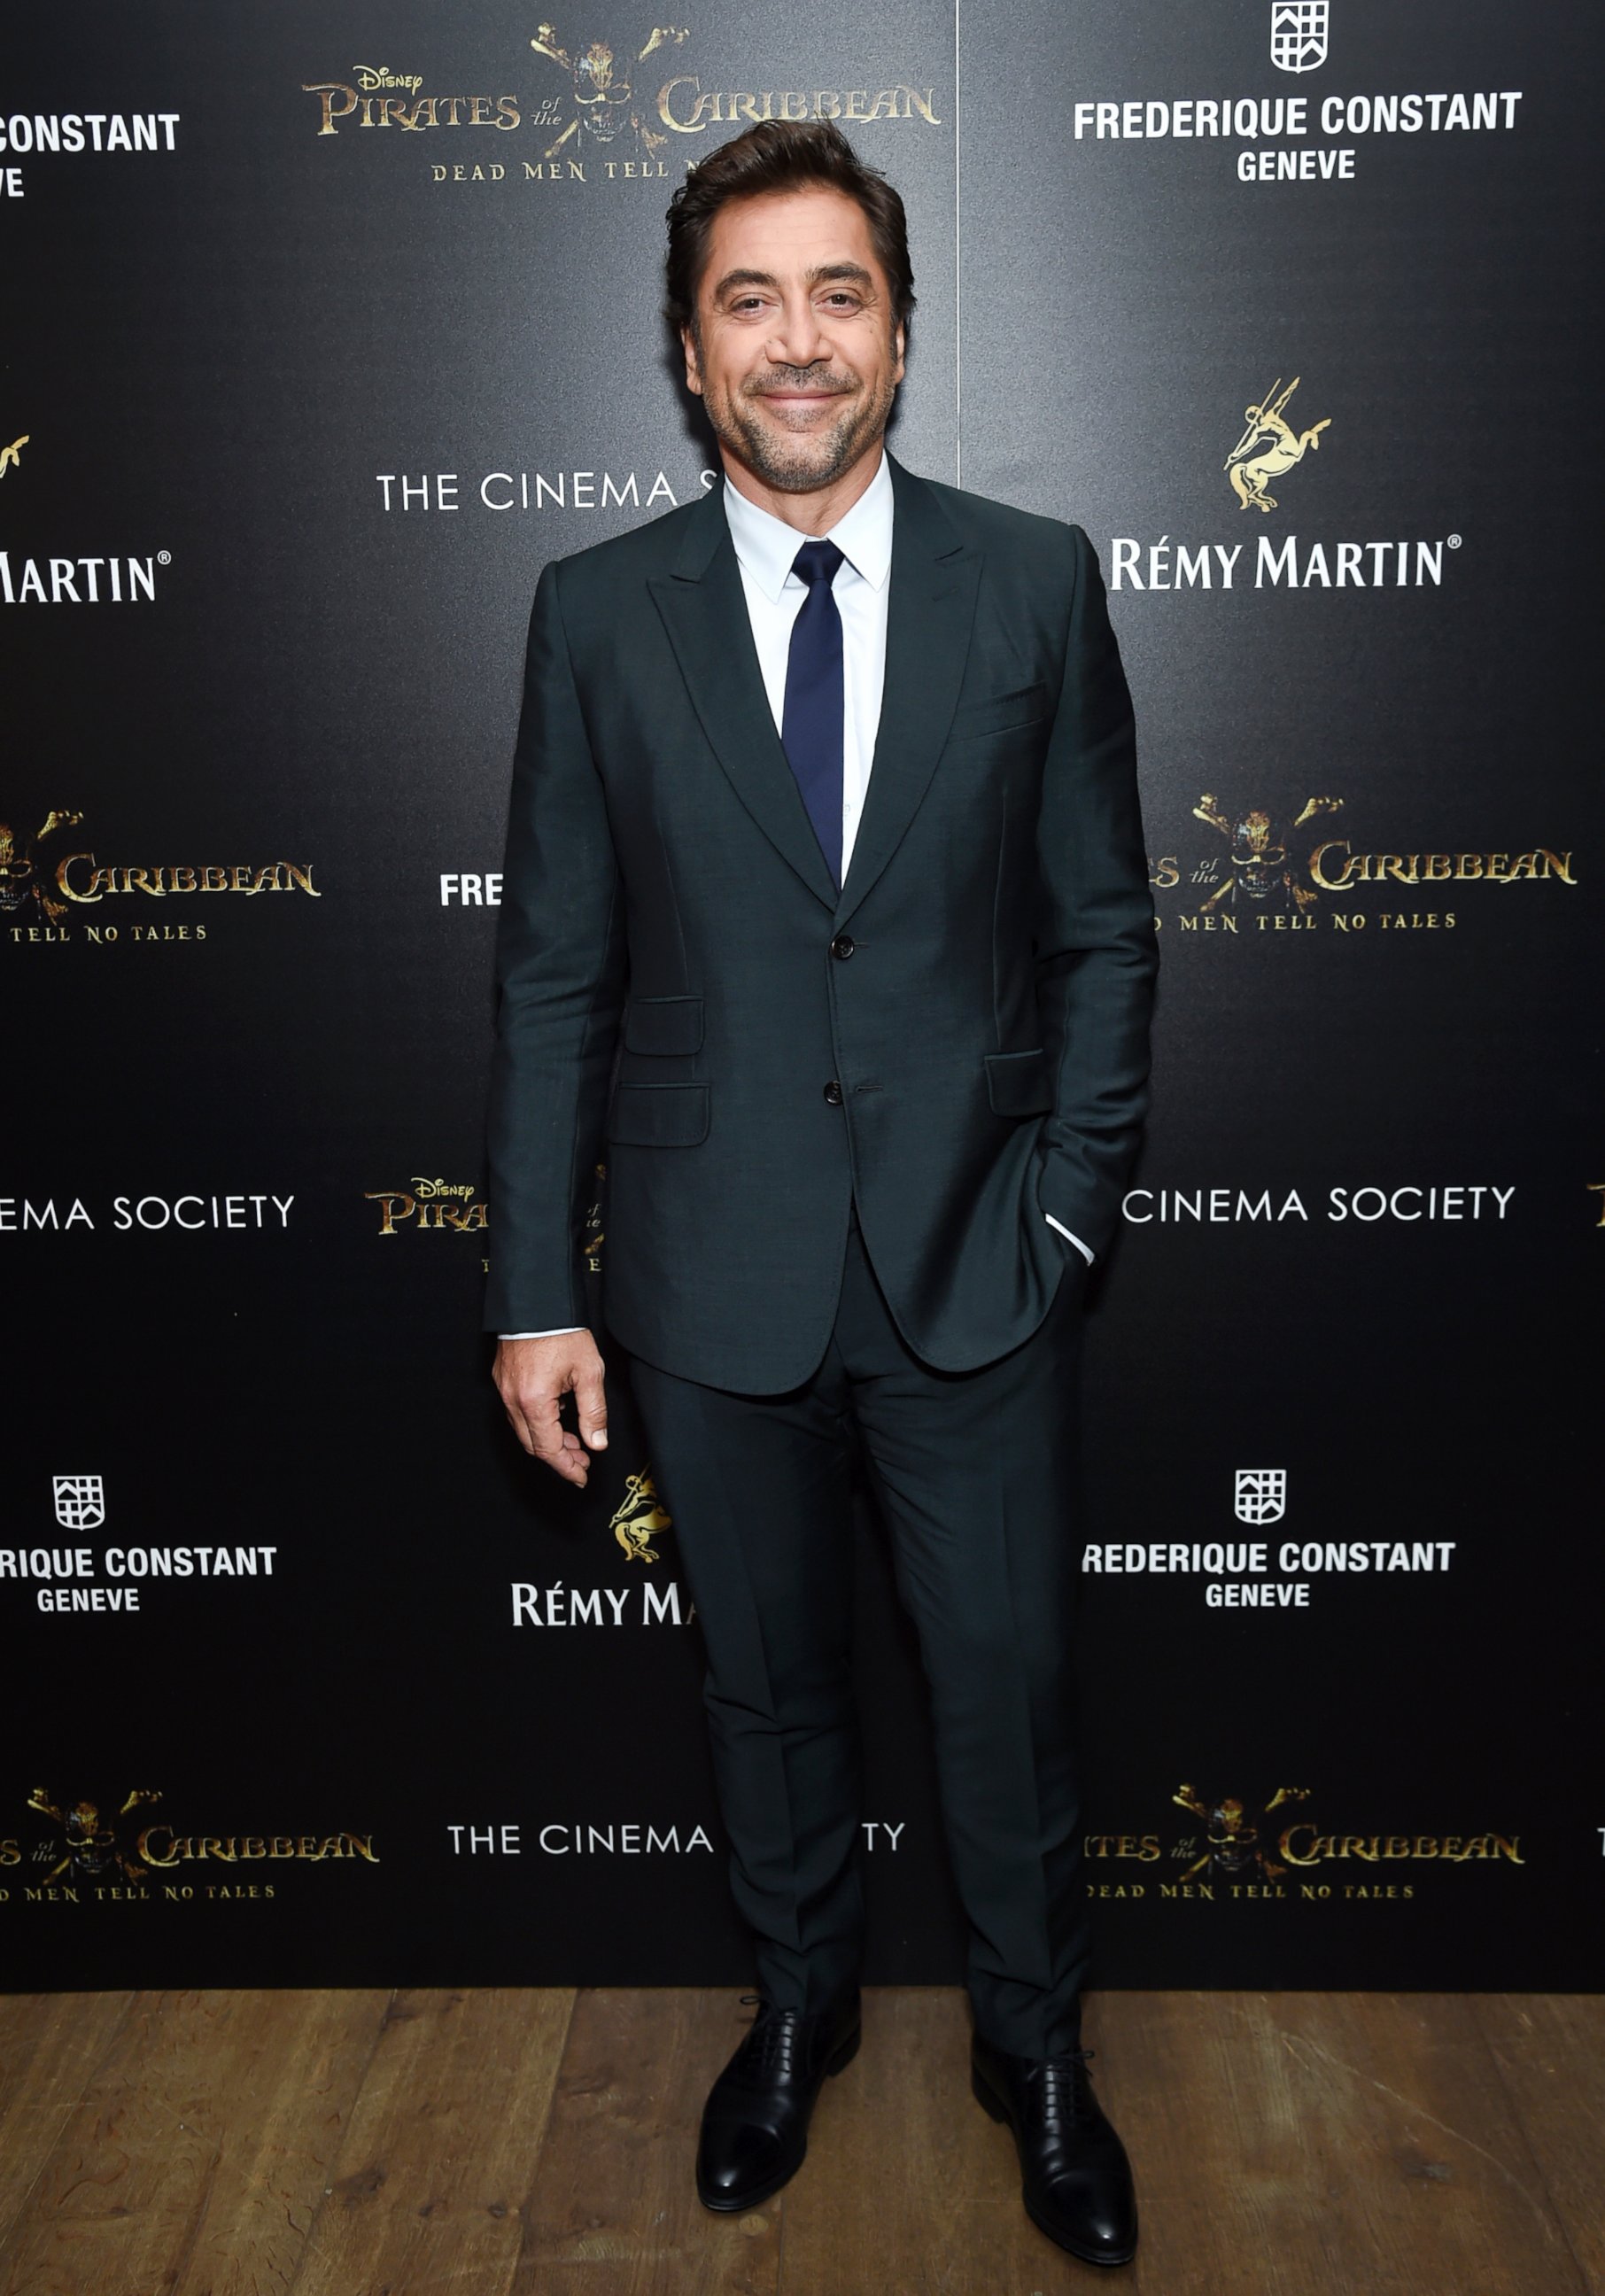 PHOTO: Javier Bardem attends a special screening of Walt Disney Studios' "Pirates of the Caribbean: Dead Men Tell No Tales" at the Crosby Street Hotel, May 23, 2017, in New York City.